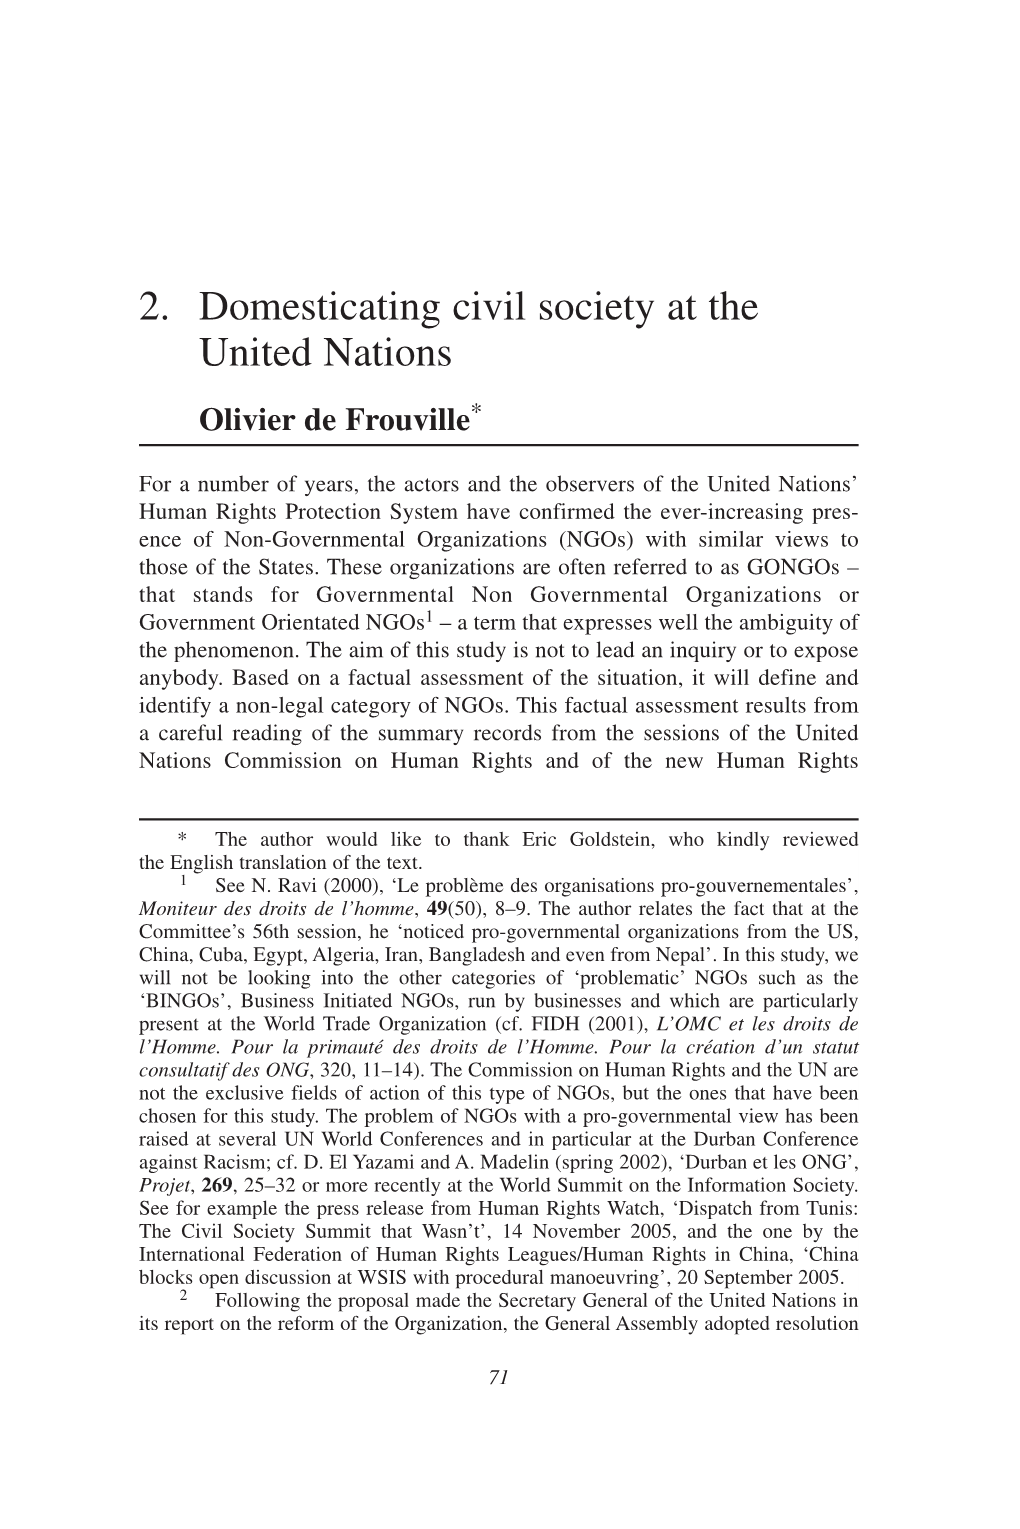 2. Domesticating Civil Society at the United Nations Olivier De Frouville*